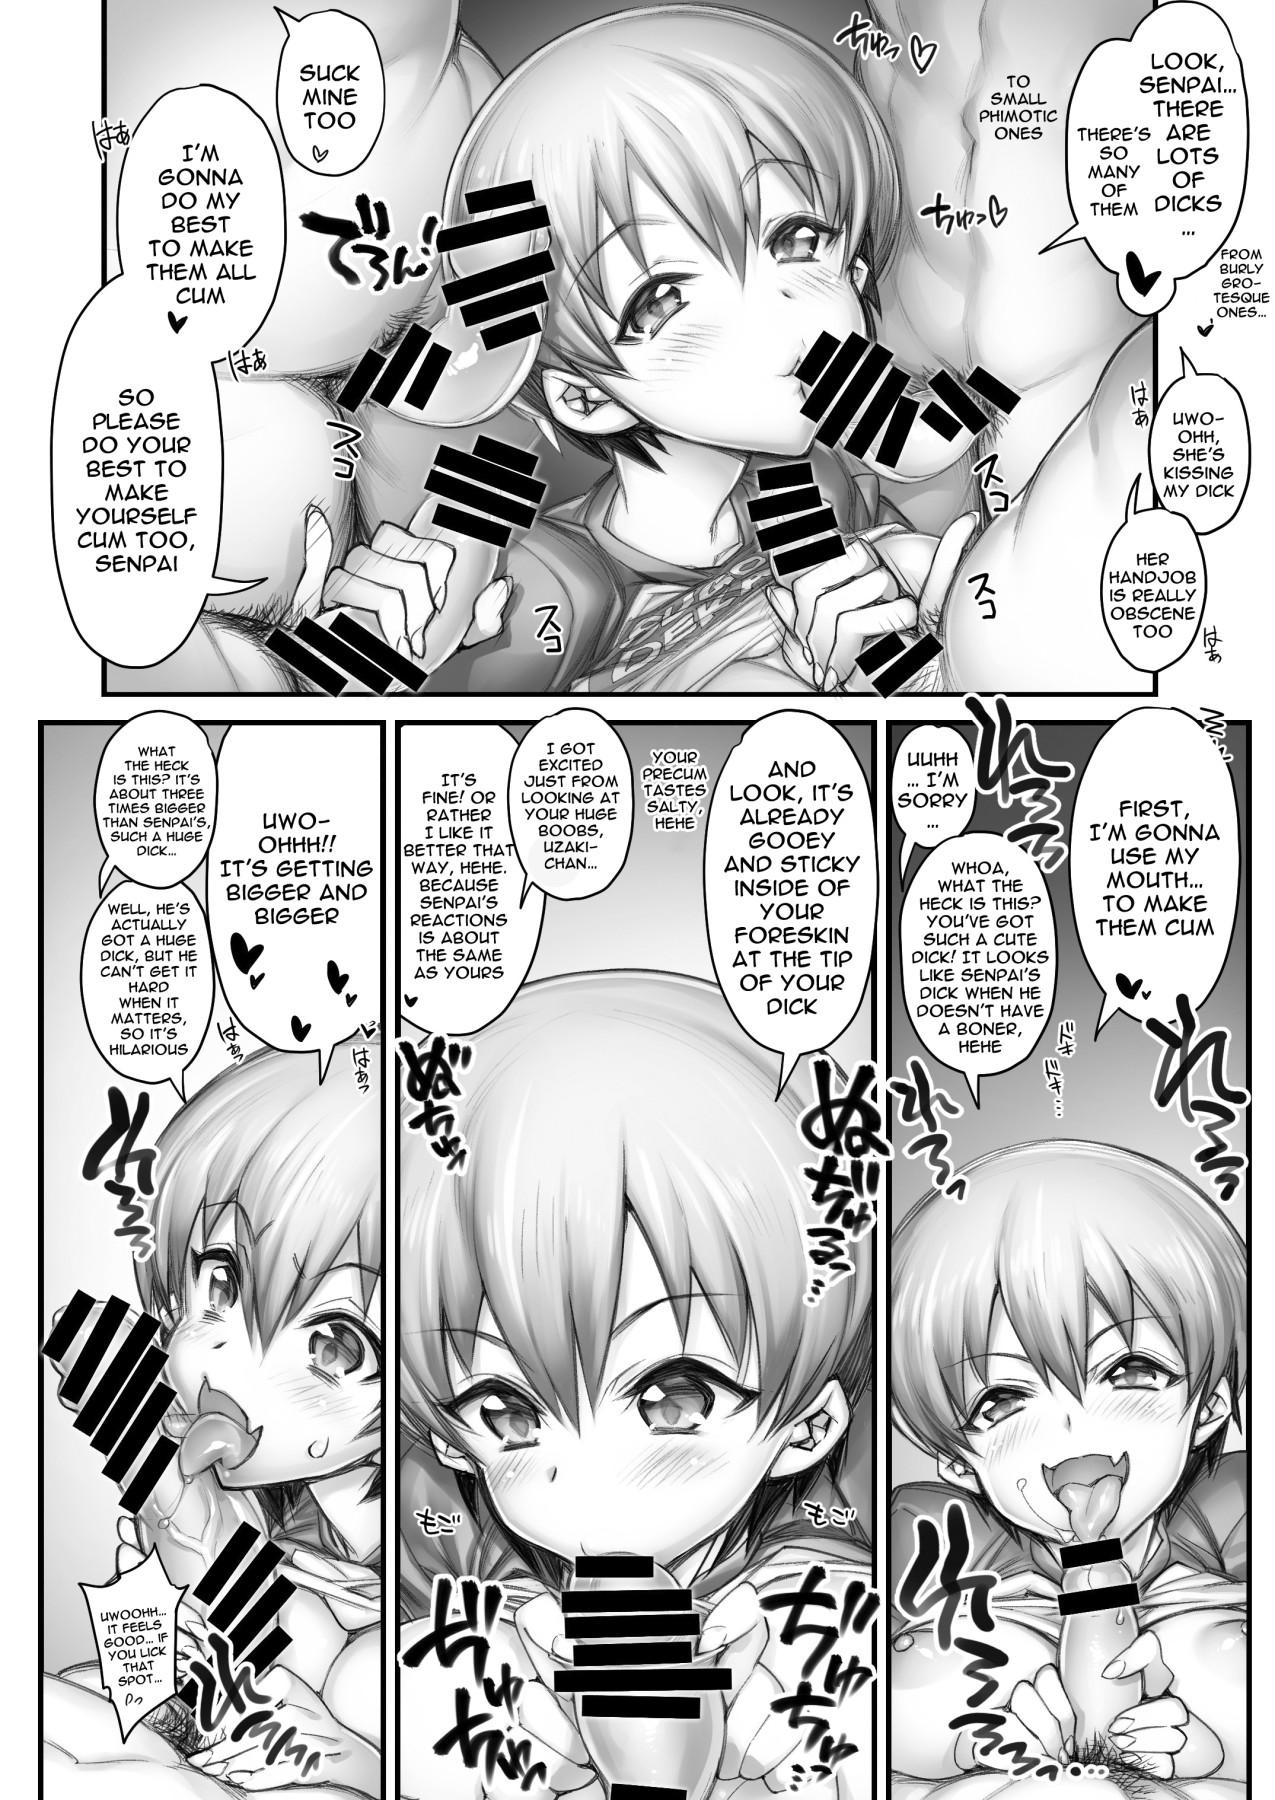 Topless Uzaki-chan Wants To Message To Senpai Videos Of Her Having Sex With Lots of Men!! - Uzaki chan wa asobitai Hot Couple Sex - Page 4